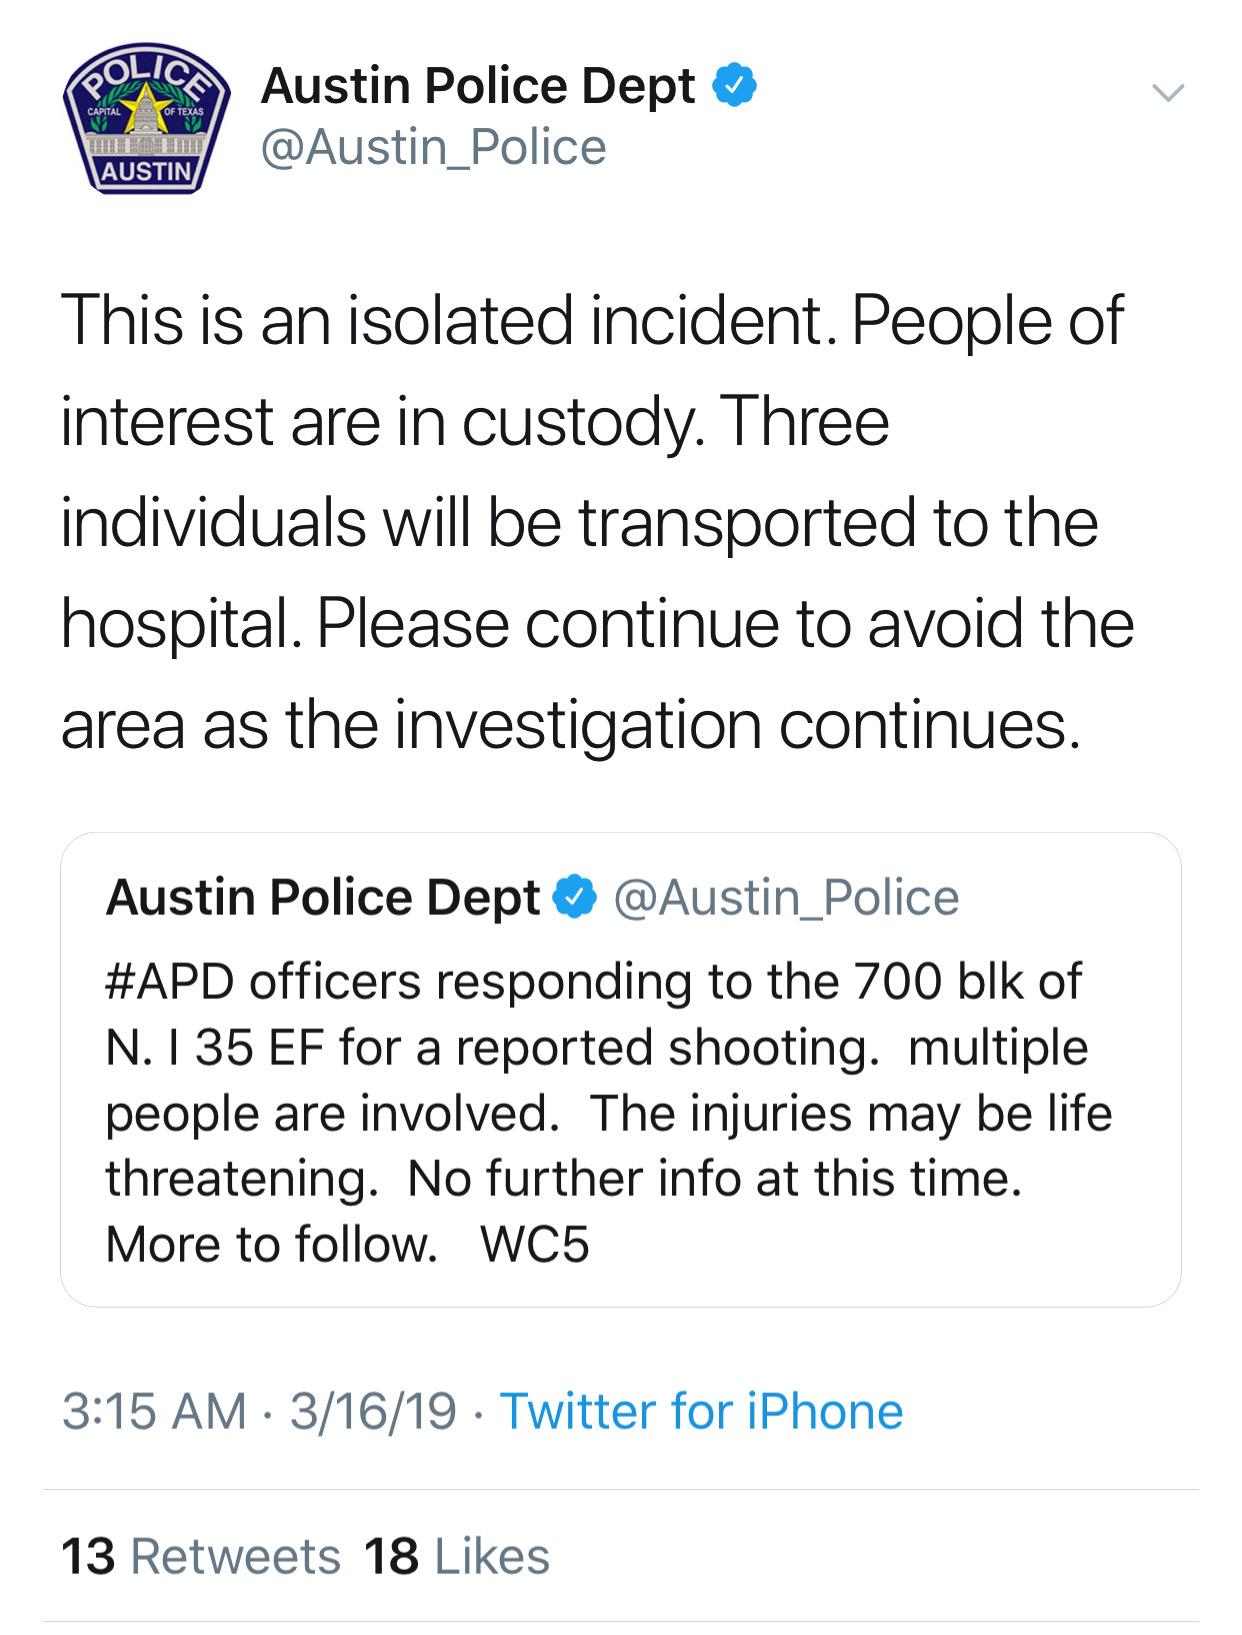 One+suspect+in+custody+after+shooting+near+SXSW